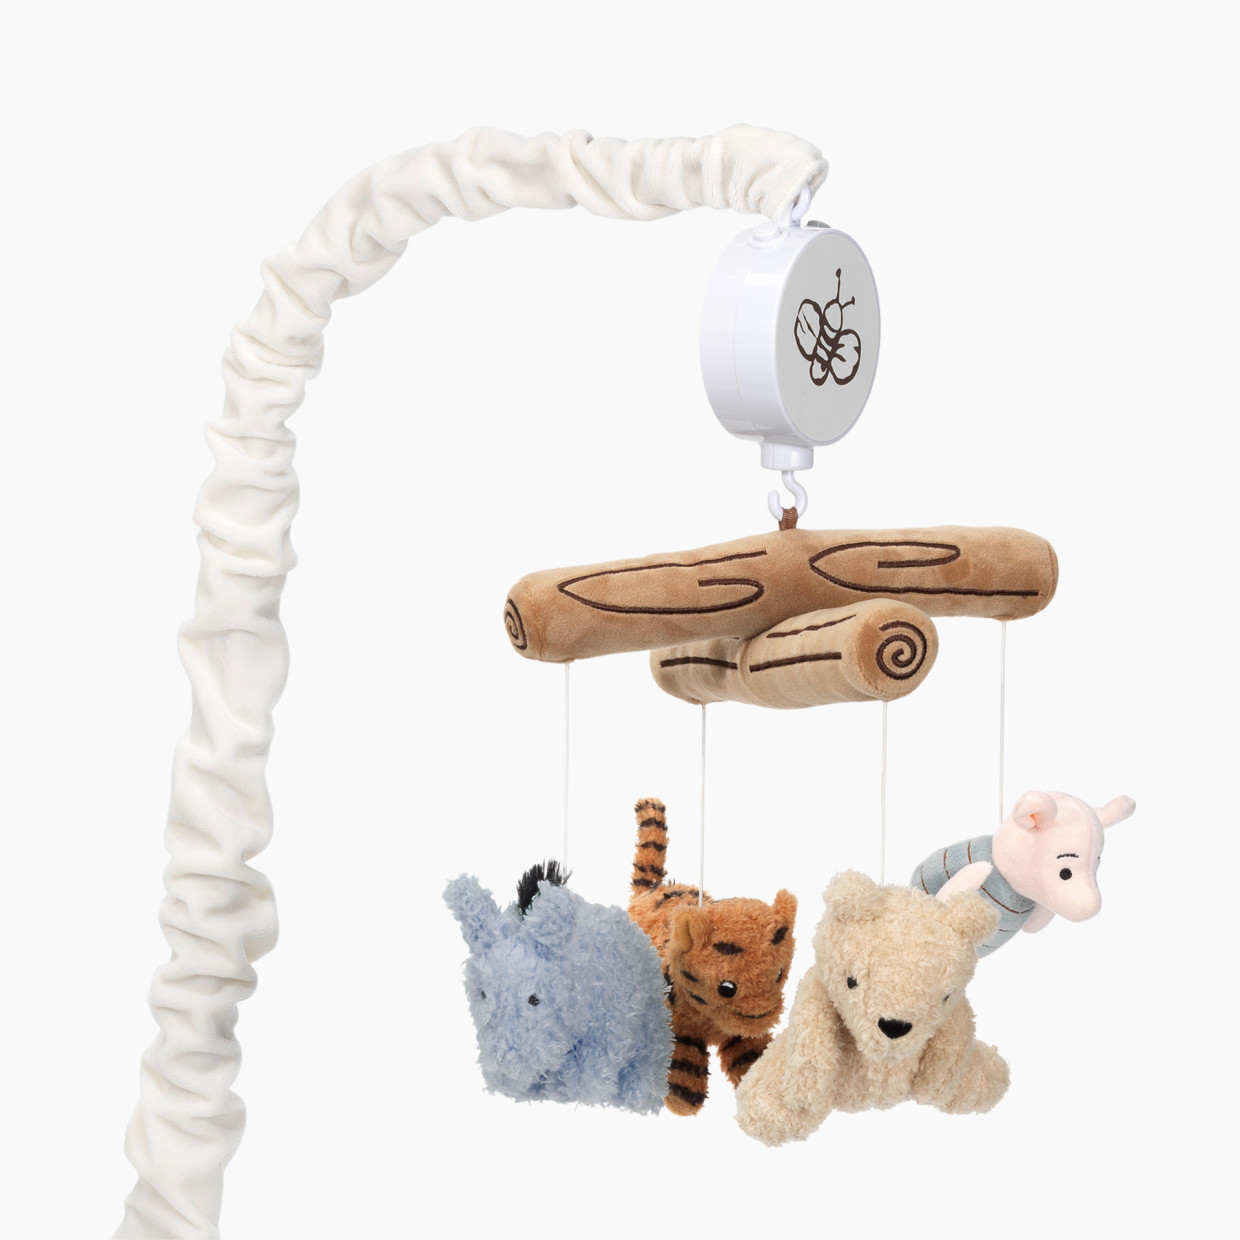 Lambs & Ivy Musical Baby Crib Mobile - Storytime Pooh.